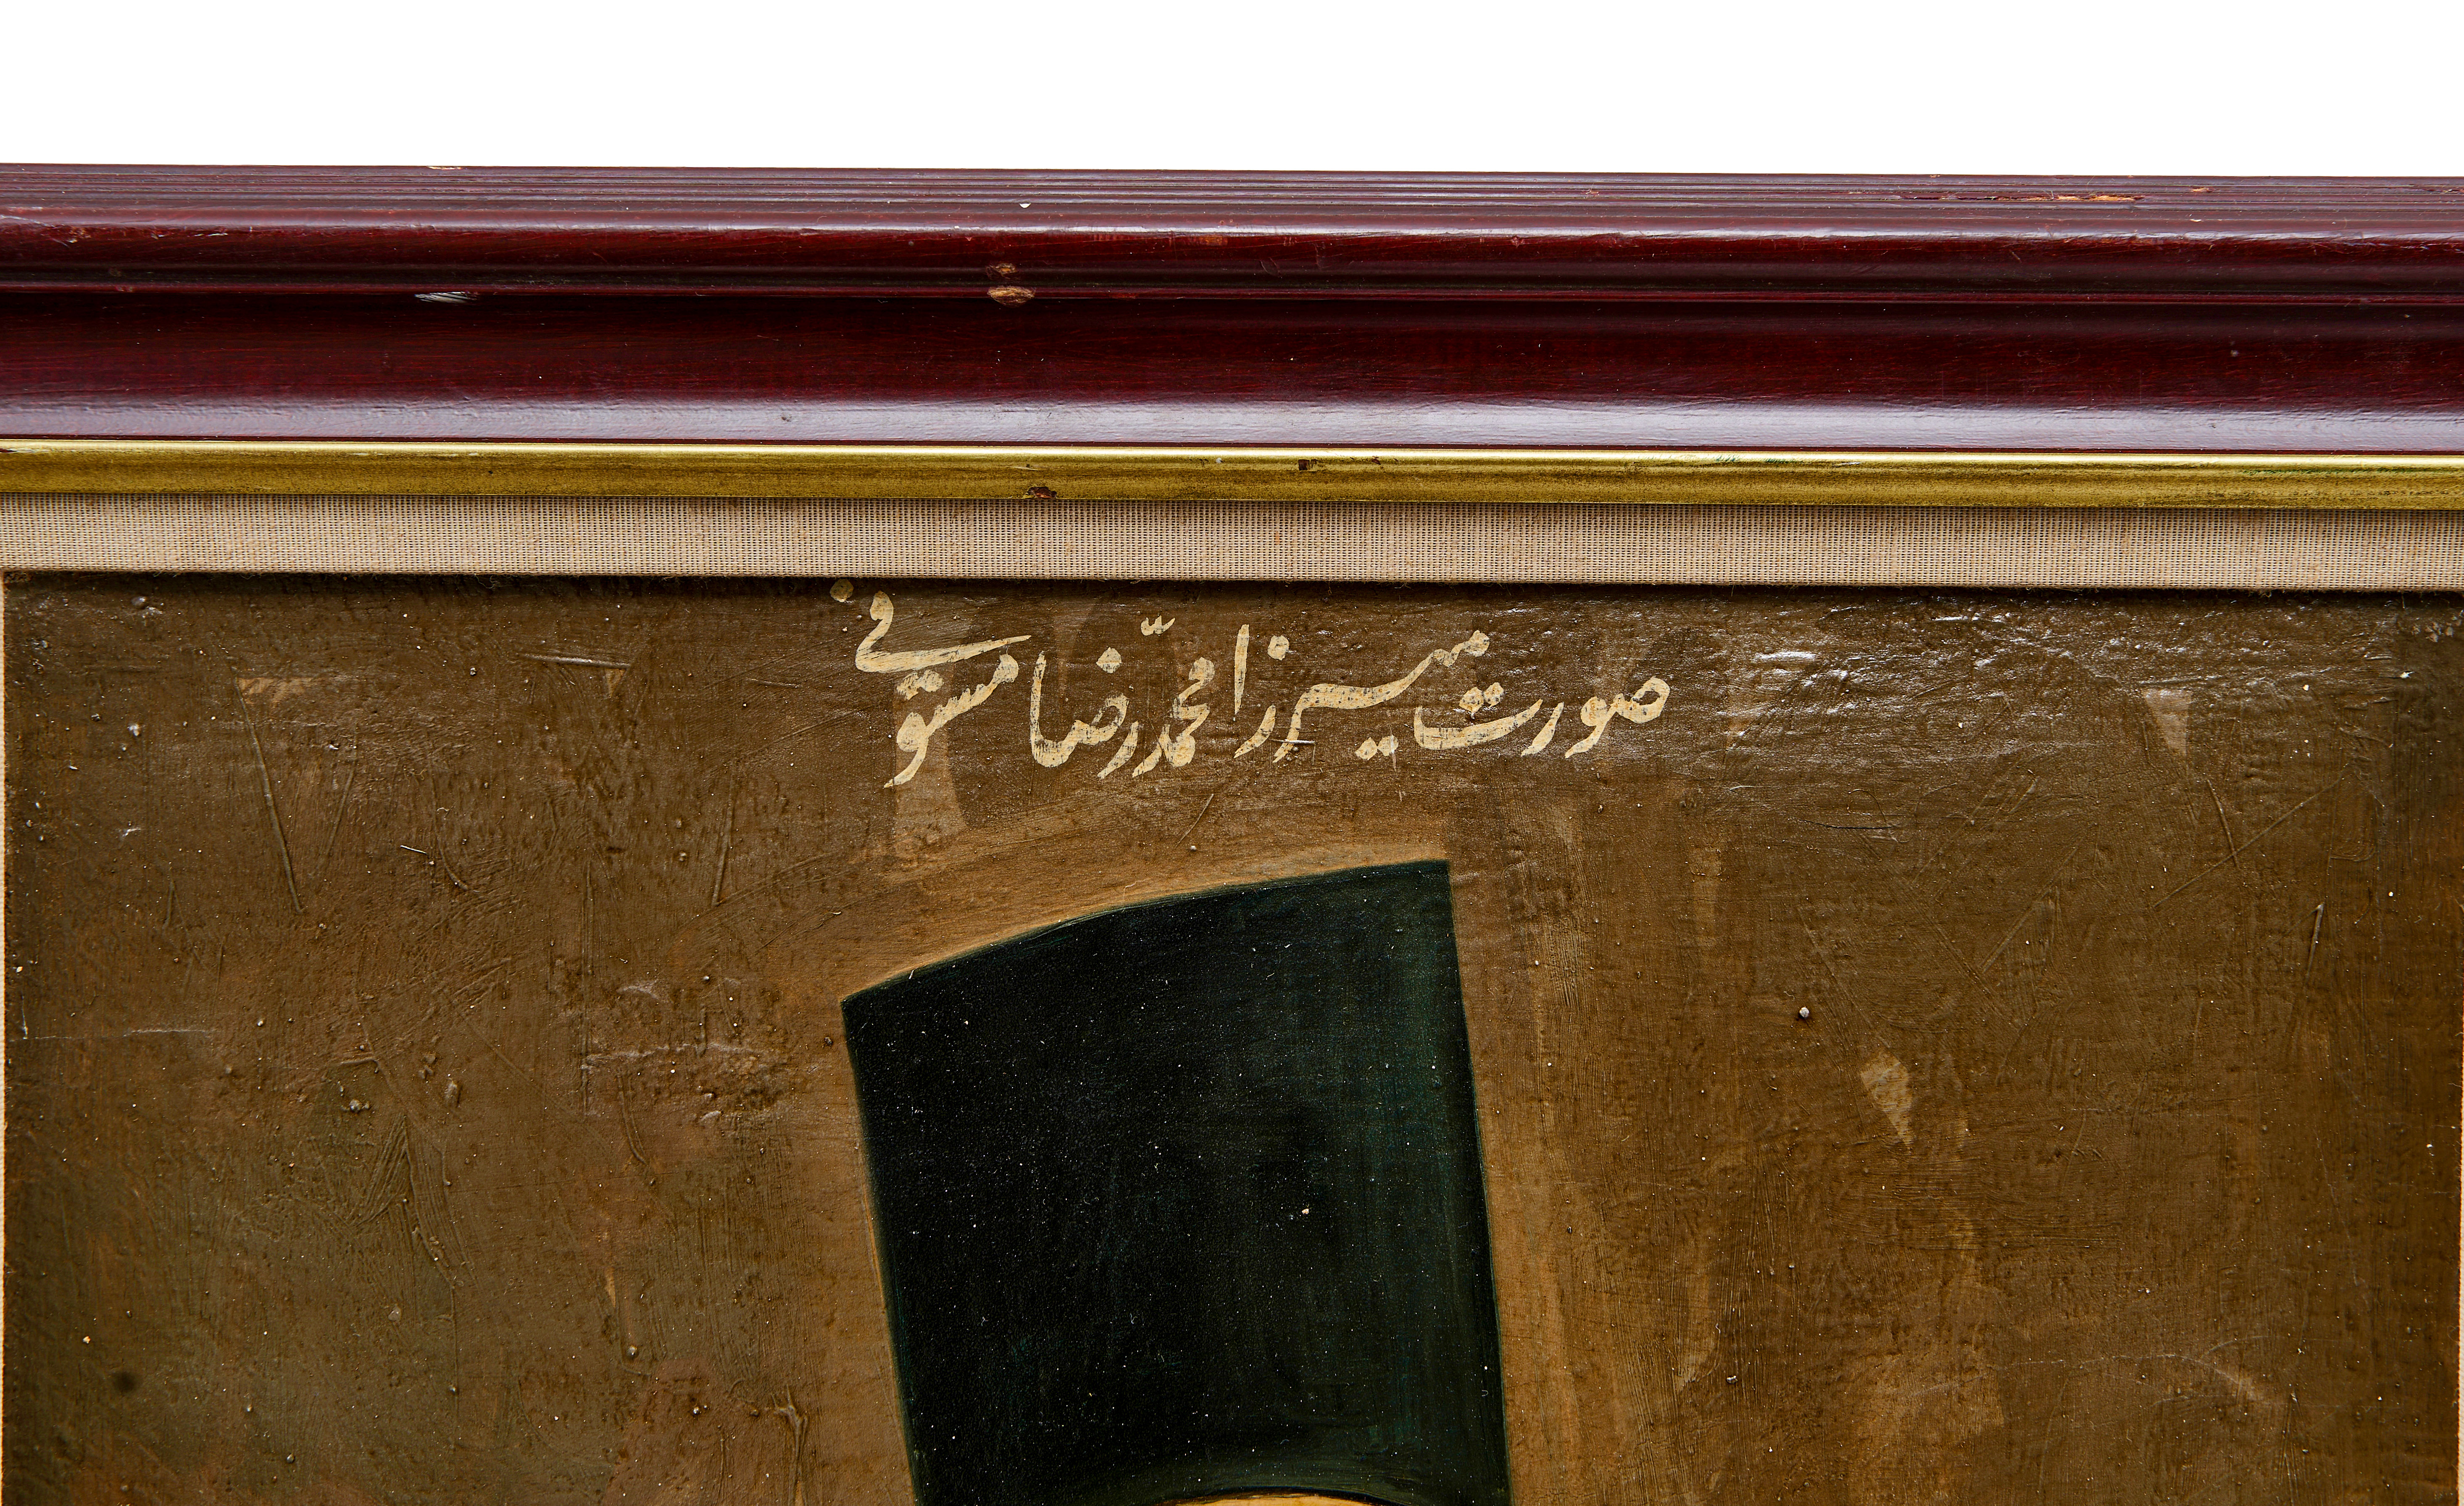 A PORTRAIT OF MIRZA MUHAMAH REZA MOSTOFI, SIGNED & DATED BY ABULLHASEN, THIRD SON OF ABULLHASAN GHAF - Image 2 of 3